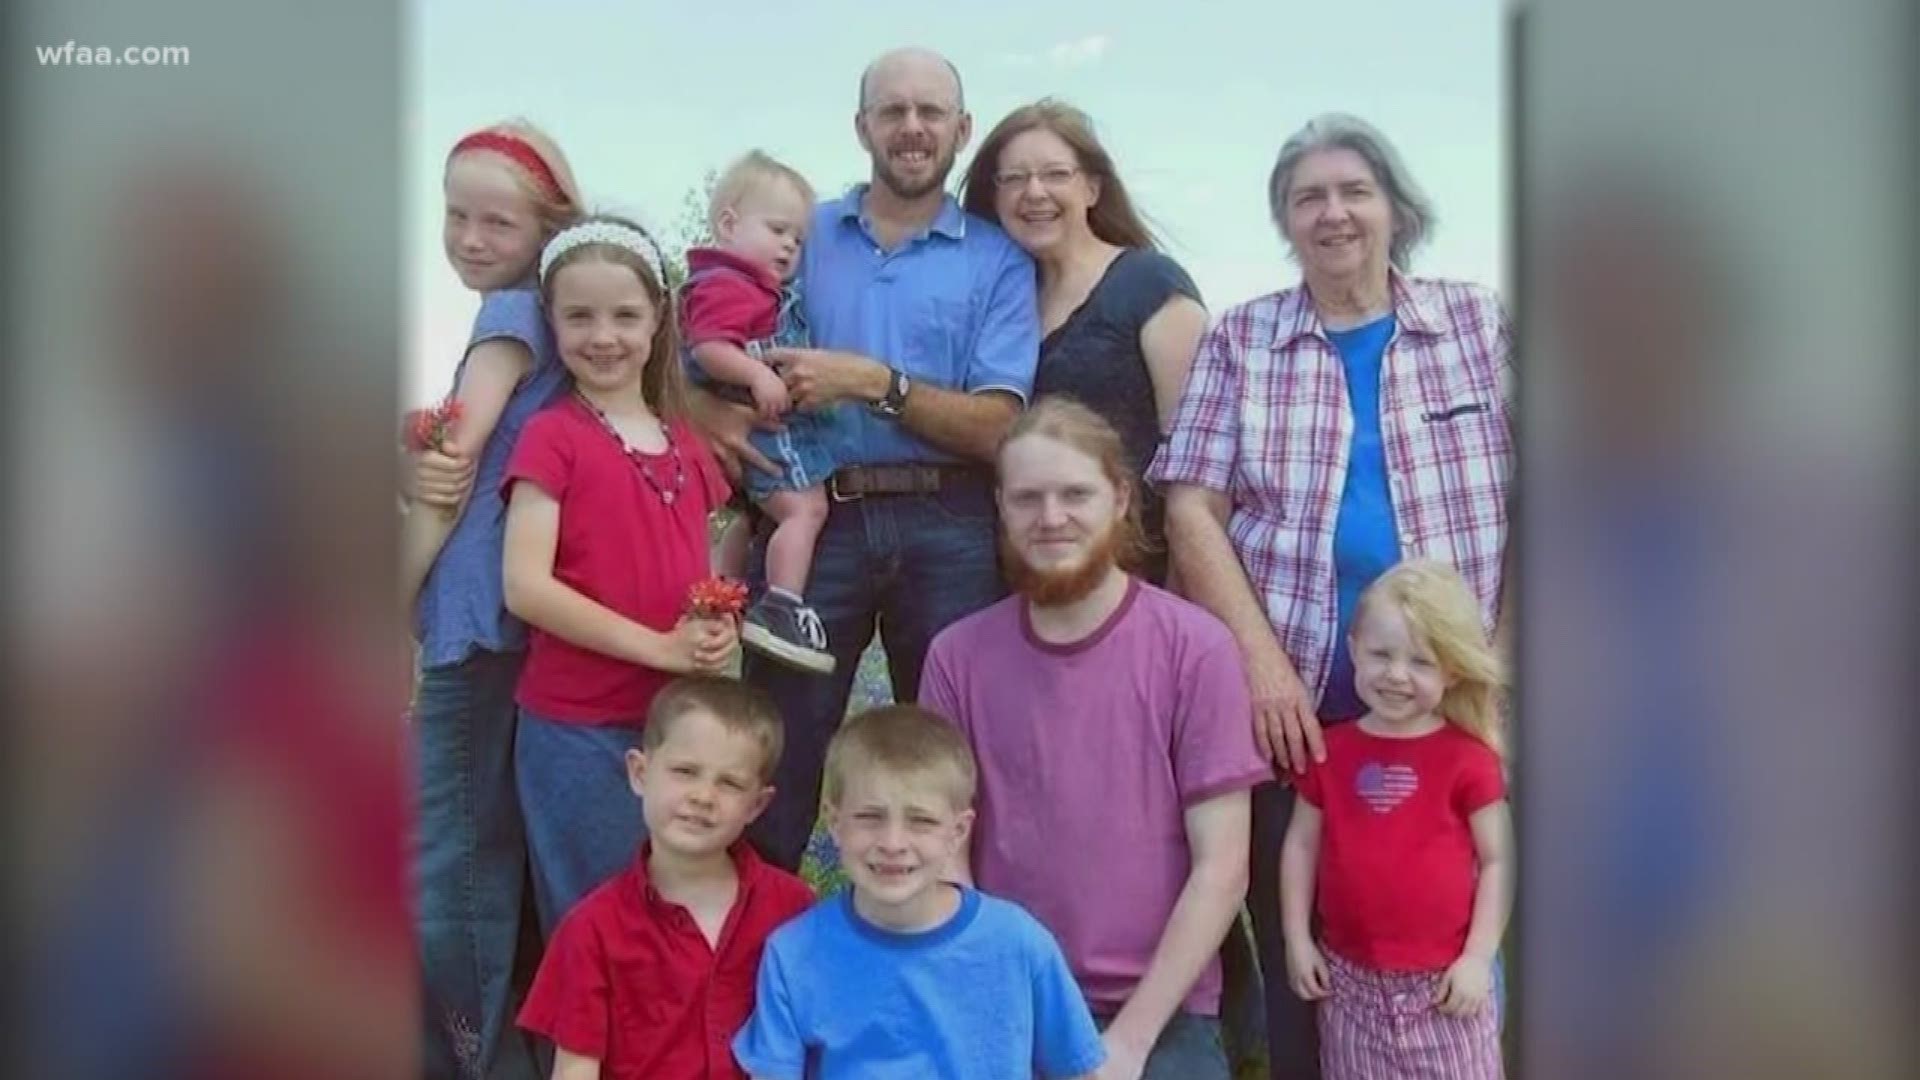 Young man becomes parents to six siblings after parents killed in crash